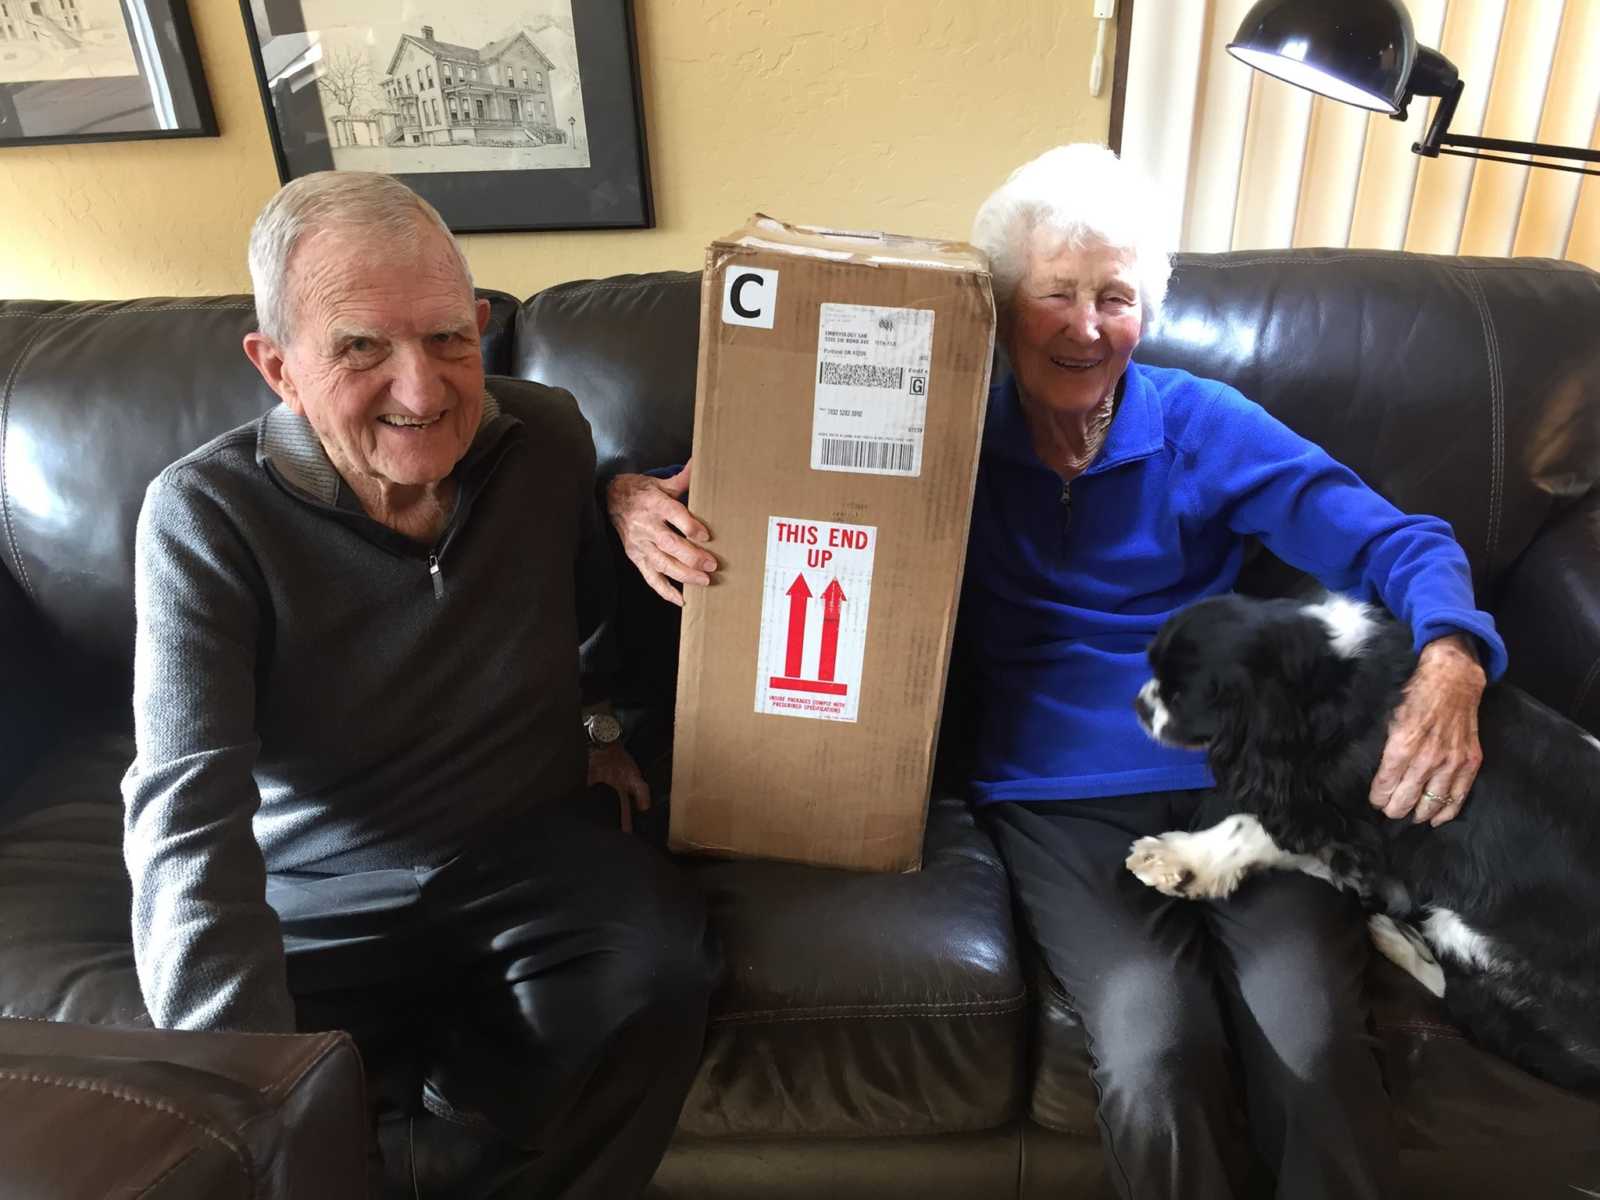 elderly man and woman sit on a couch with a dog and a box of embryos is sitting in between them